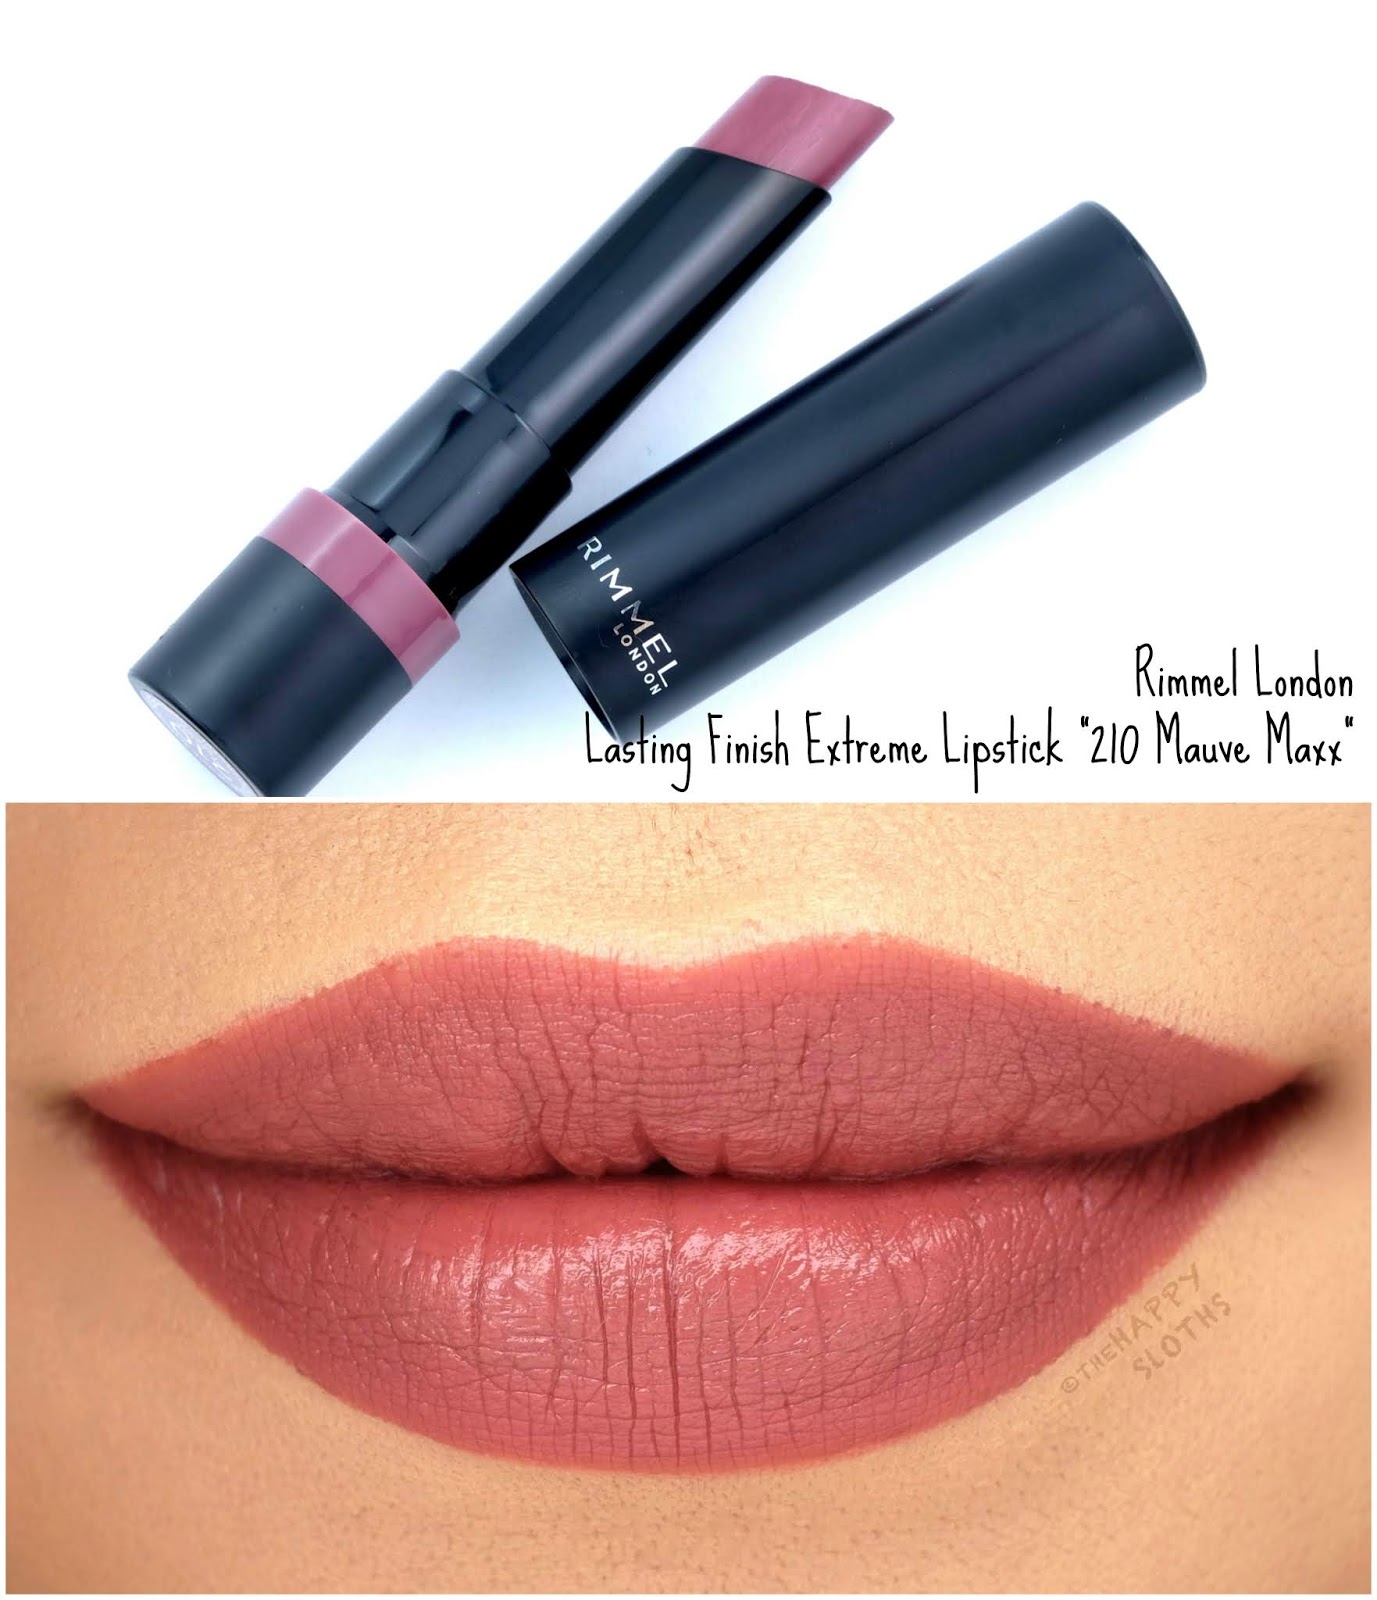 Rimmel London | Lasting Finish Extreme Lipstick in "210 Mauve Maxx": Review and Swatches